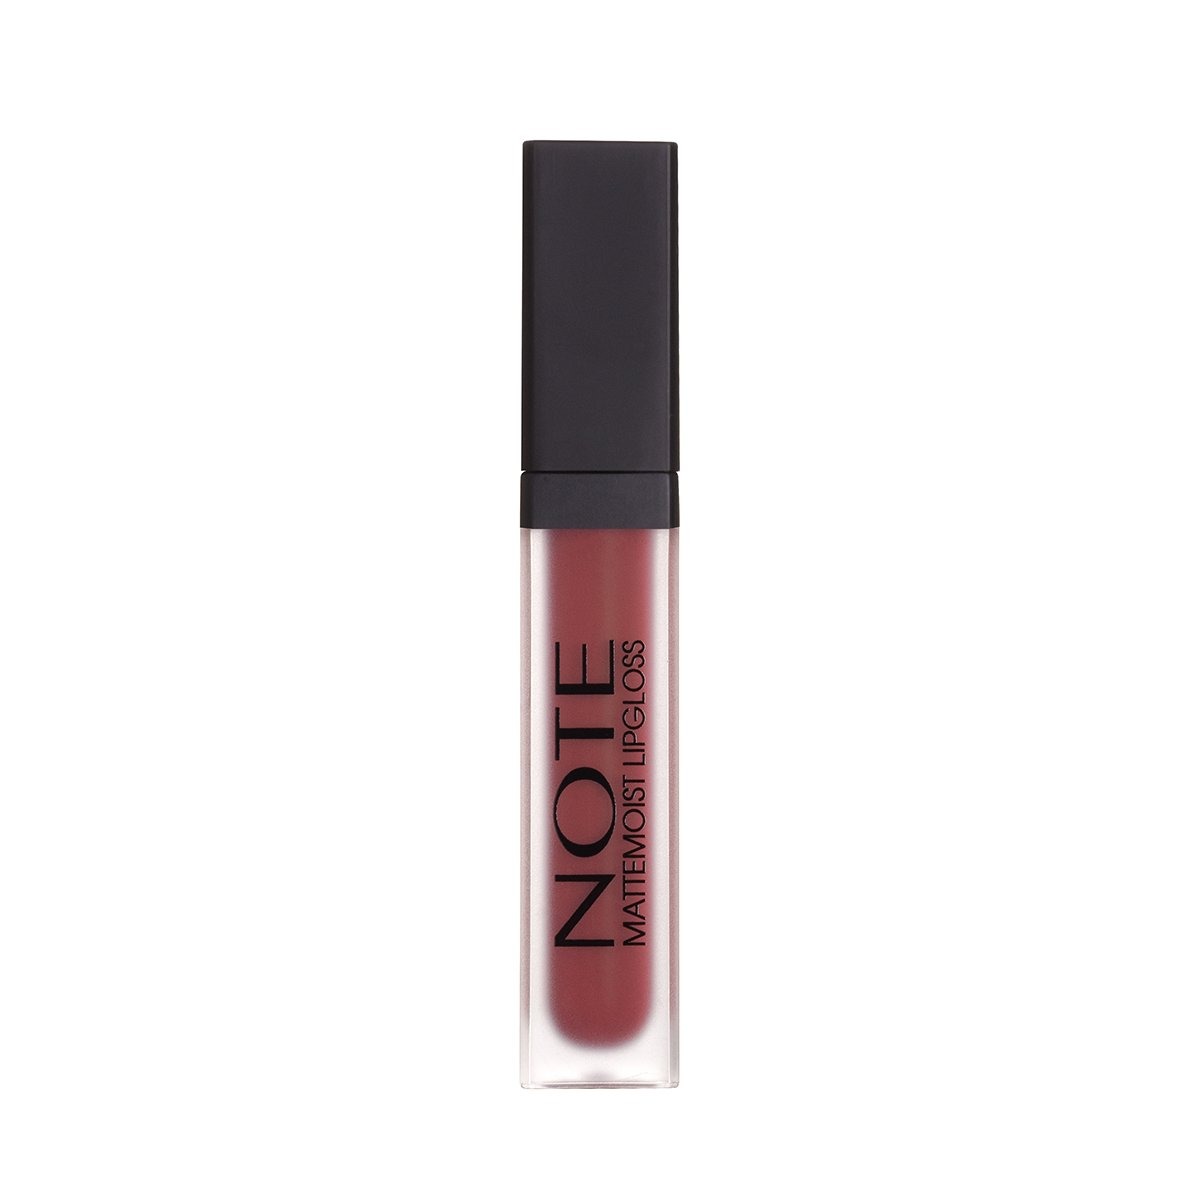 NOTE MATTEMOIST LIPGLOSS - 408 FEMME FATALE - Halal Lipgloss, Vegan Lipgloss, Cruelty Free Lipgloss, Paraben Free Lipgloss, Hydrating, Long Lasting, Complete Coverage, Vibrant